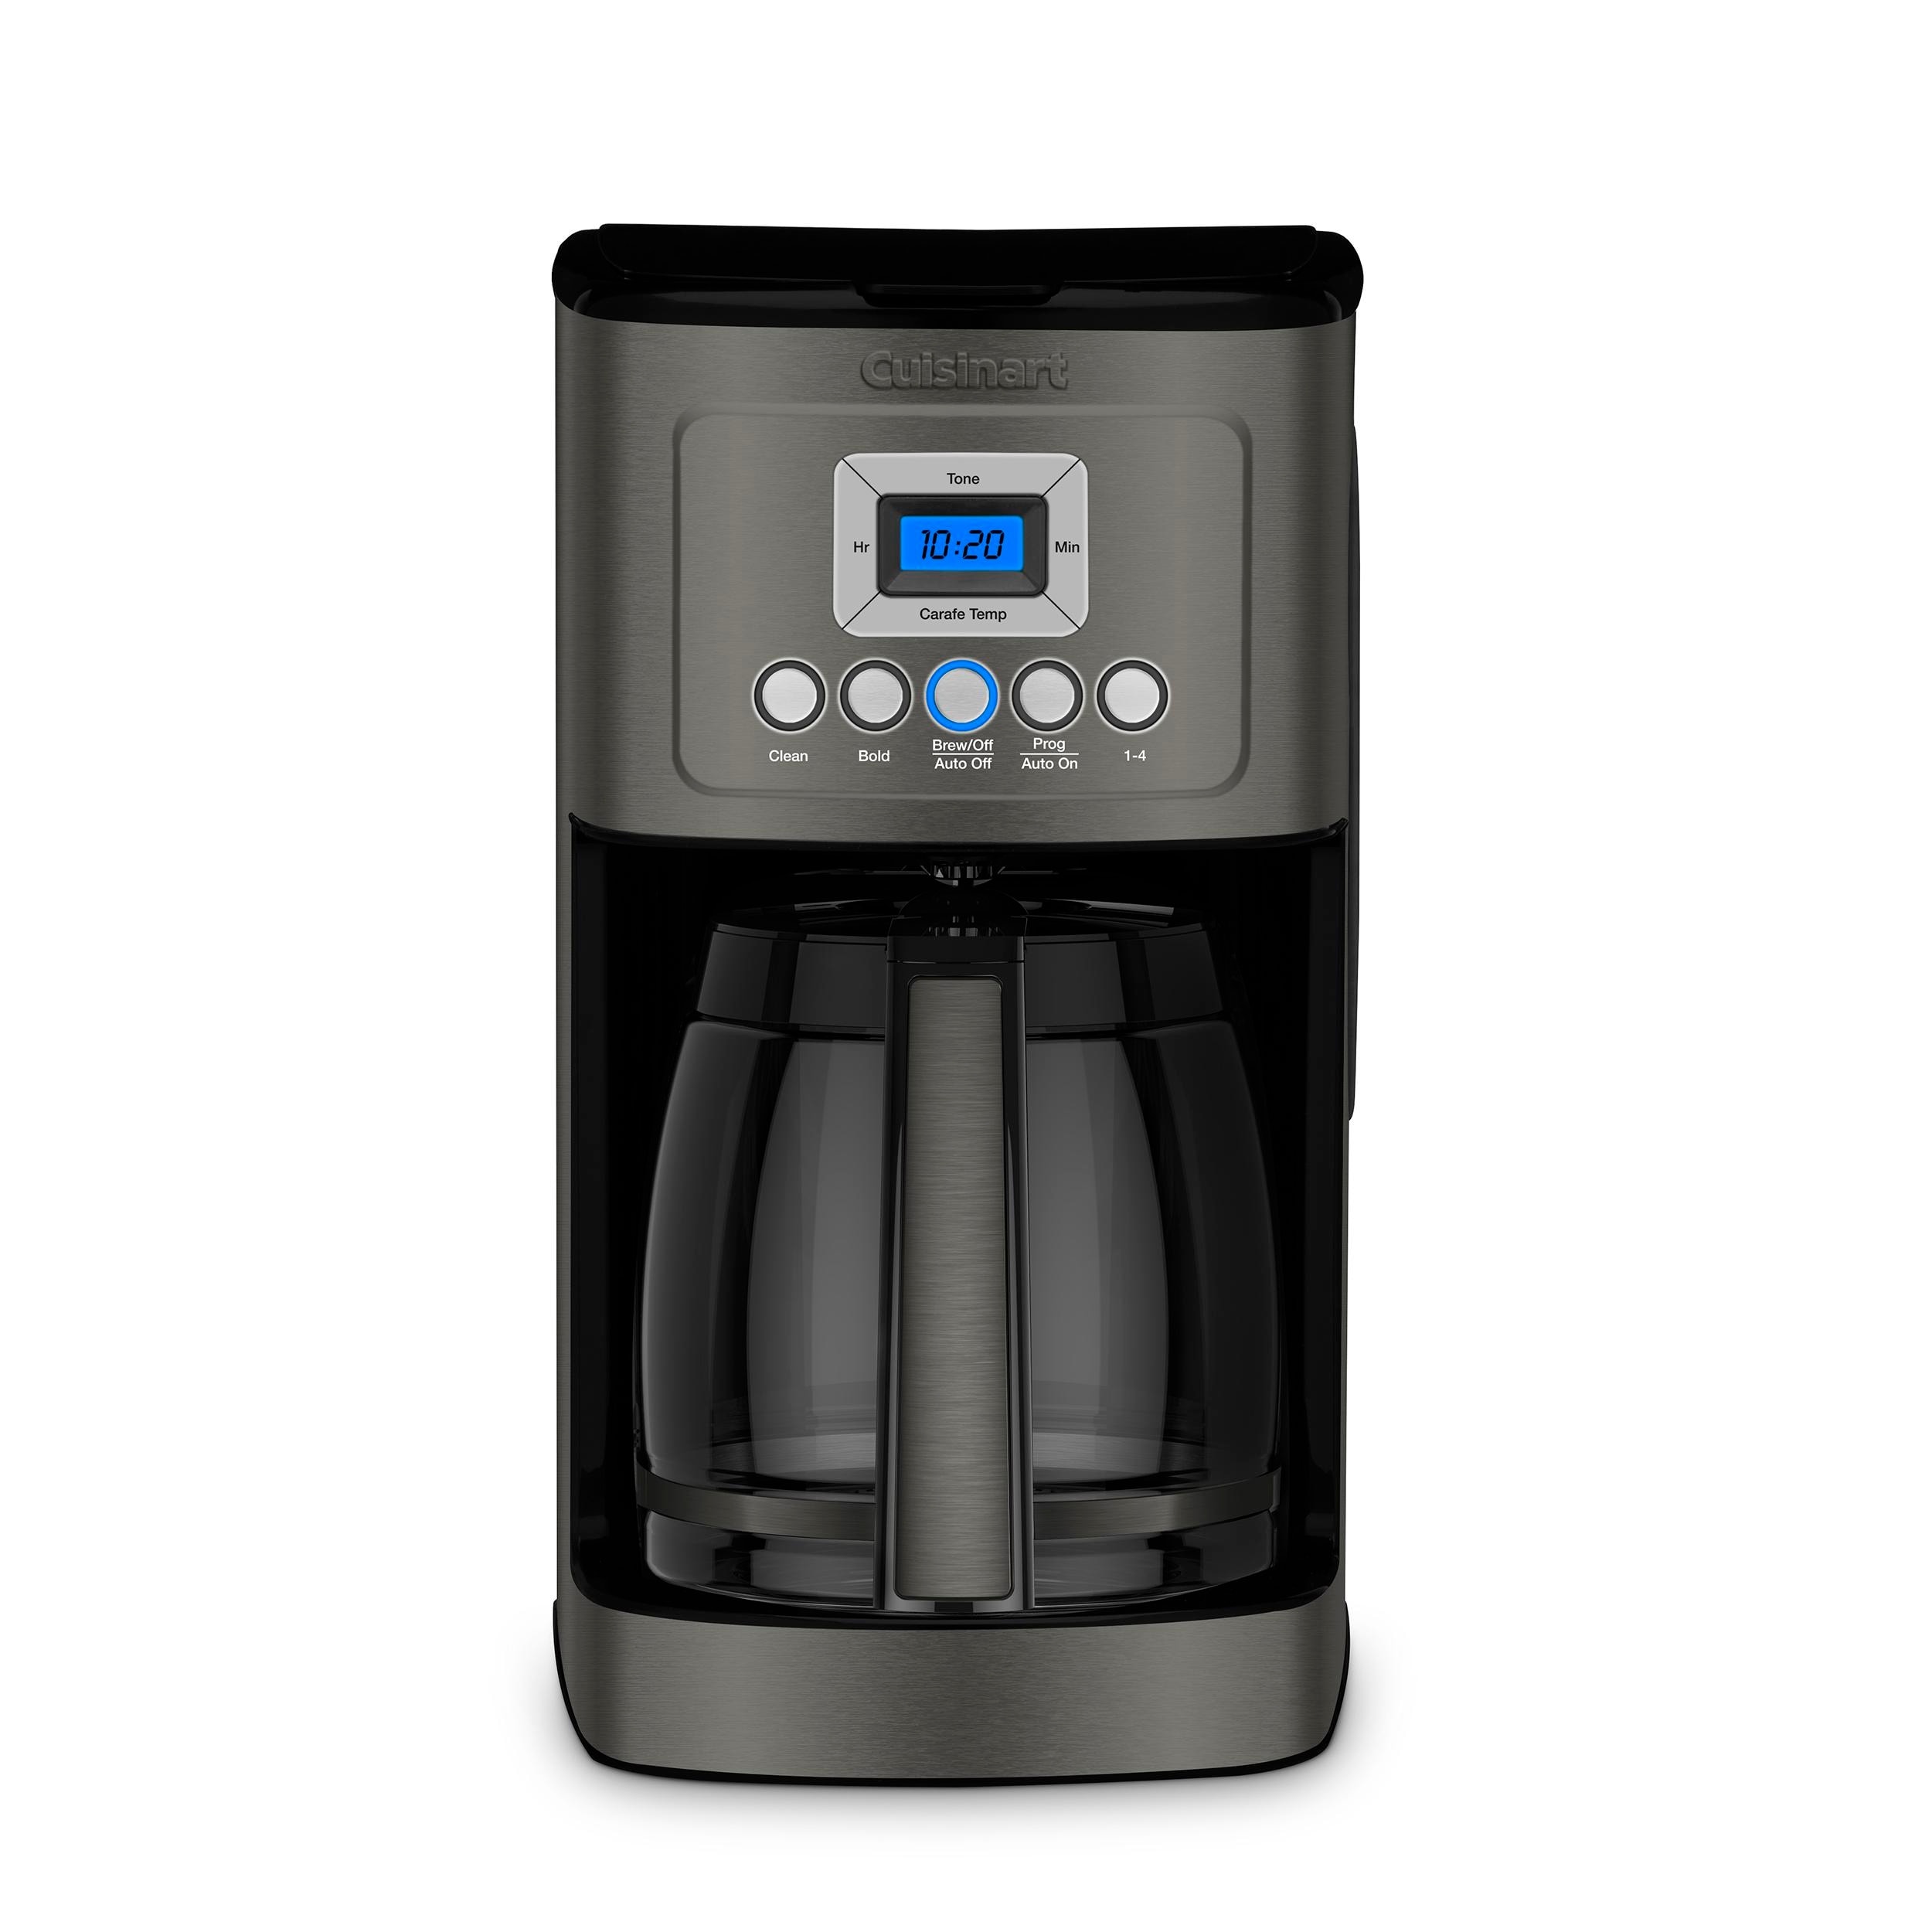 https://ak1.ostkcdn.com/images/products/is/images/direct/e5e3ff11543d493f02bfd4035220f287746ce513/14-Cup-PerfecTemp-Programmable-Coffeemaker.jpg